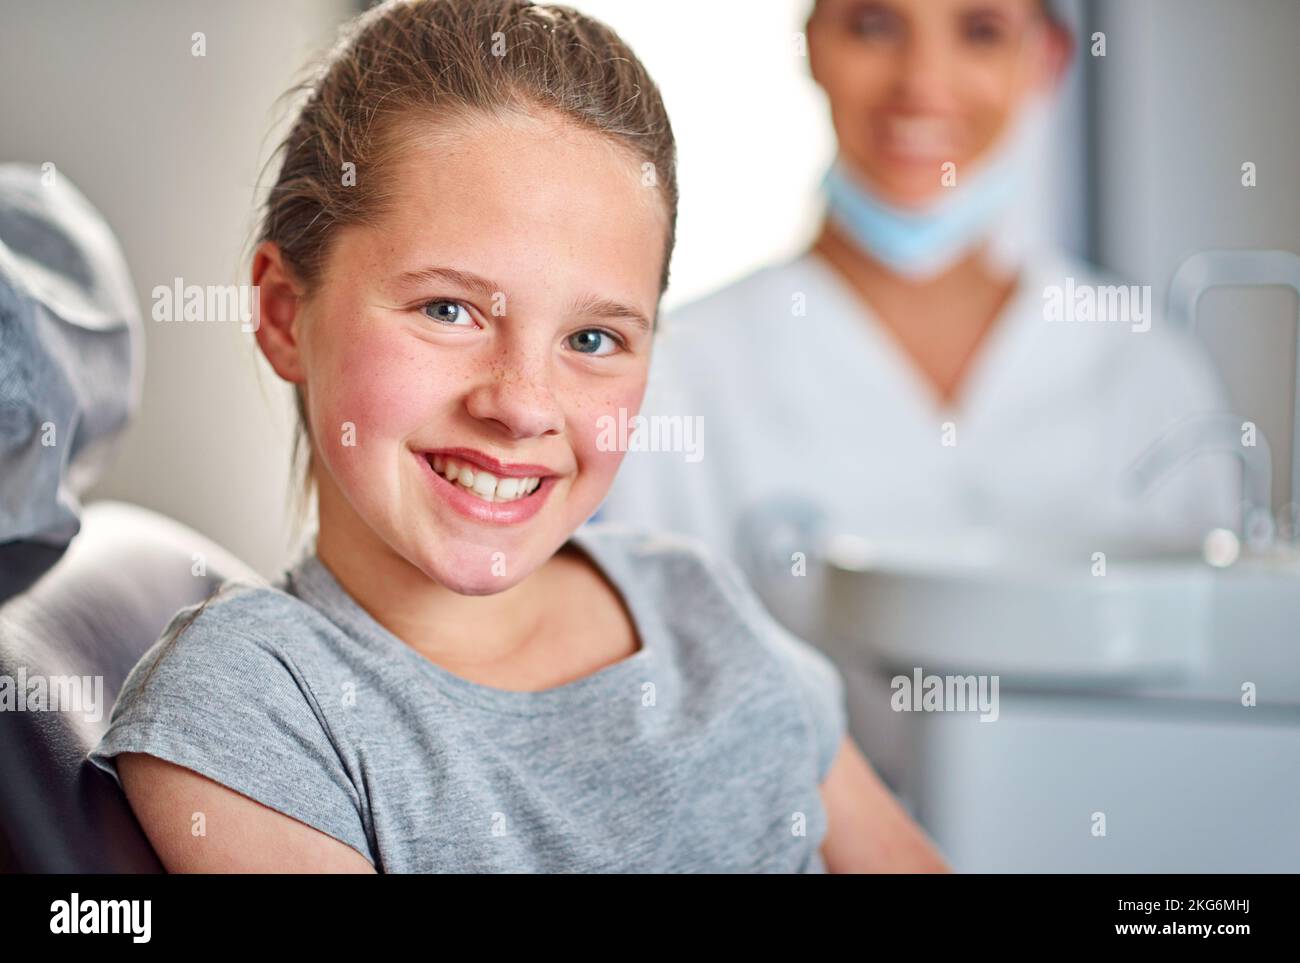 Whos afraid of the dentist Not me. A young girl sitting in a dental chair with her dentist in the background. Stock Photo